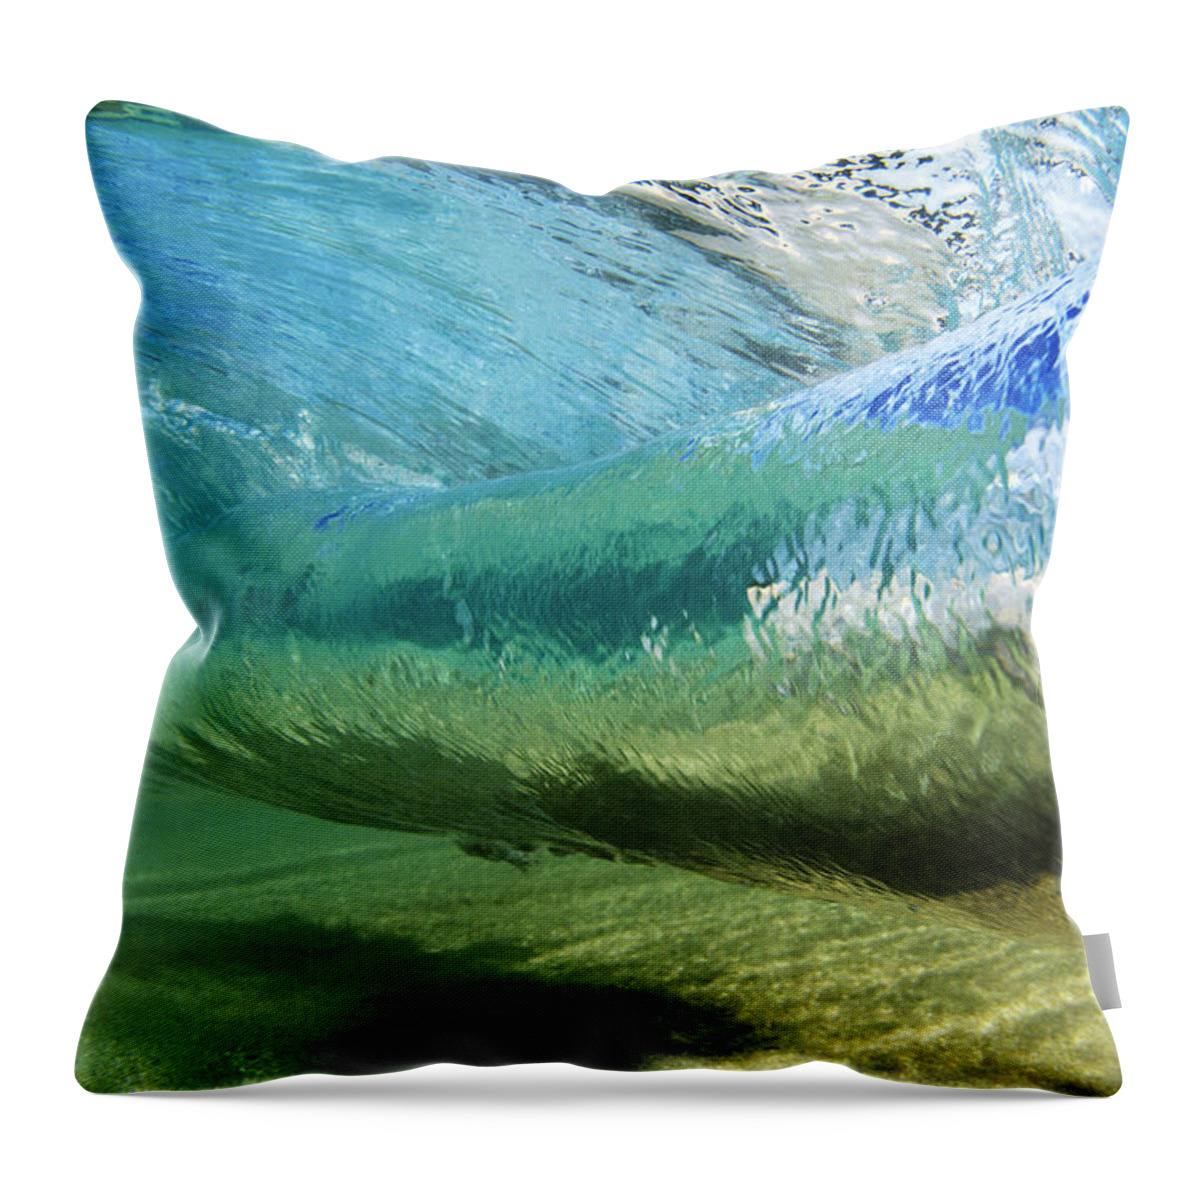 Amaze Throw Pillow featuring the photograph Underwater Wave Curl by Vince Cavataio - Printscapes